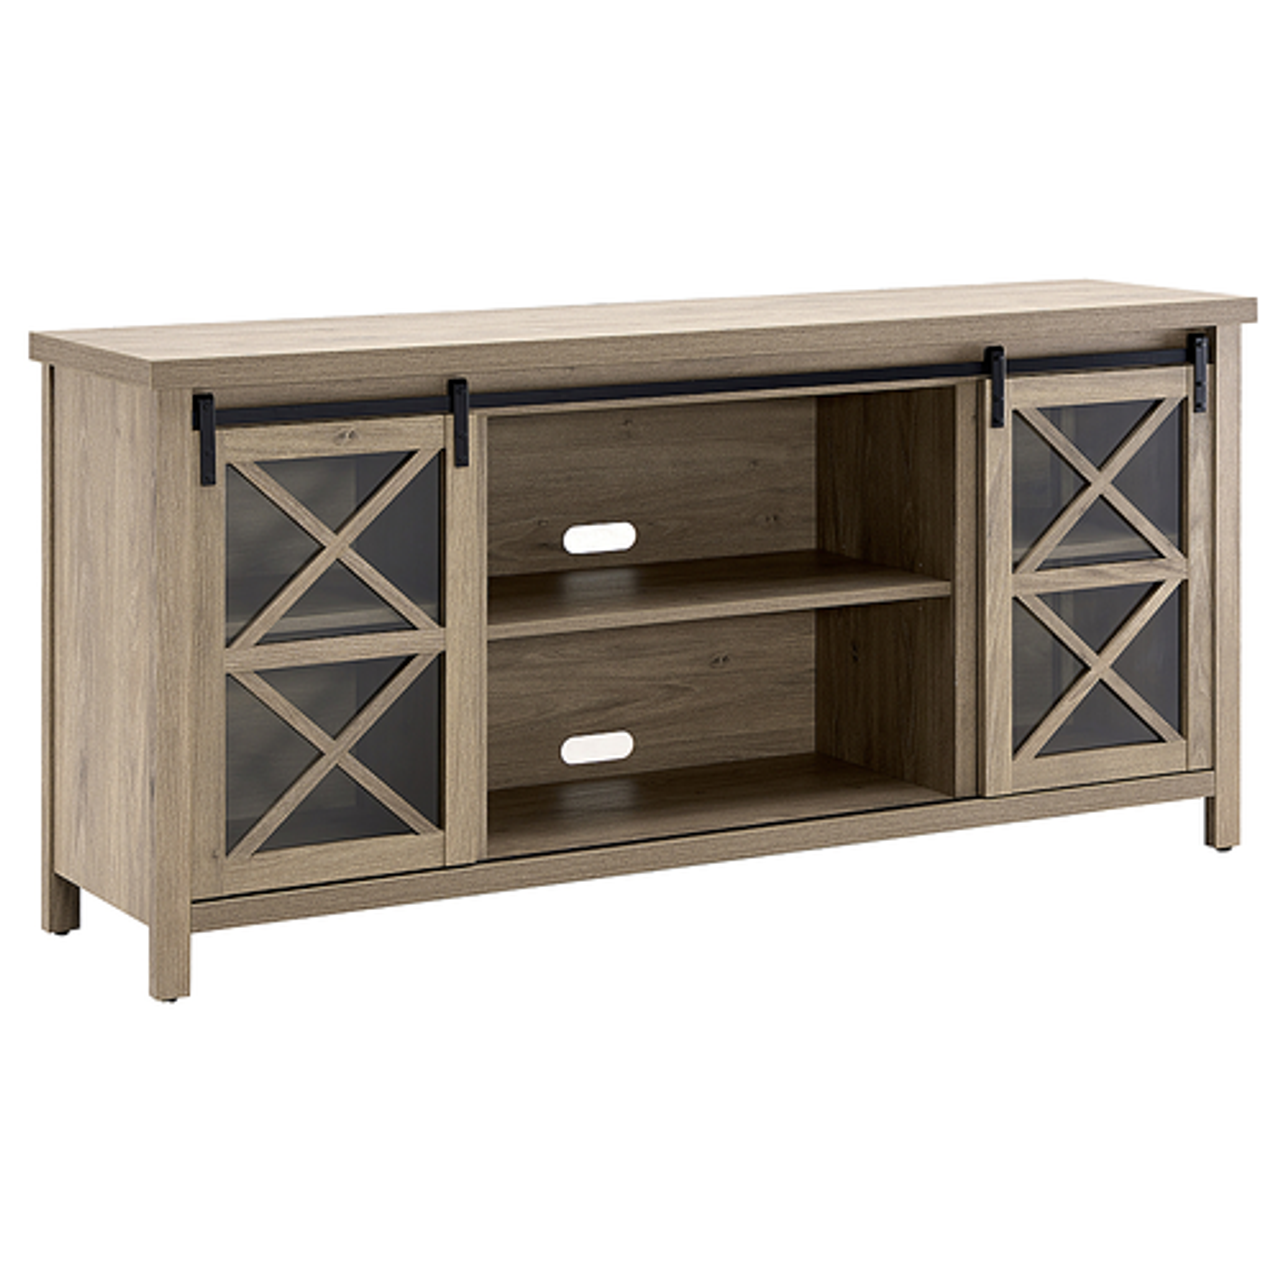 Camden&Wells - Clementine TV Stand for TVs up to 80" - Antiqued Gray Oak